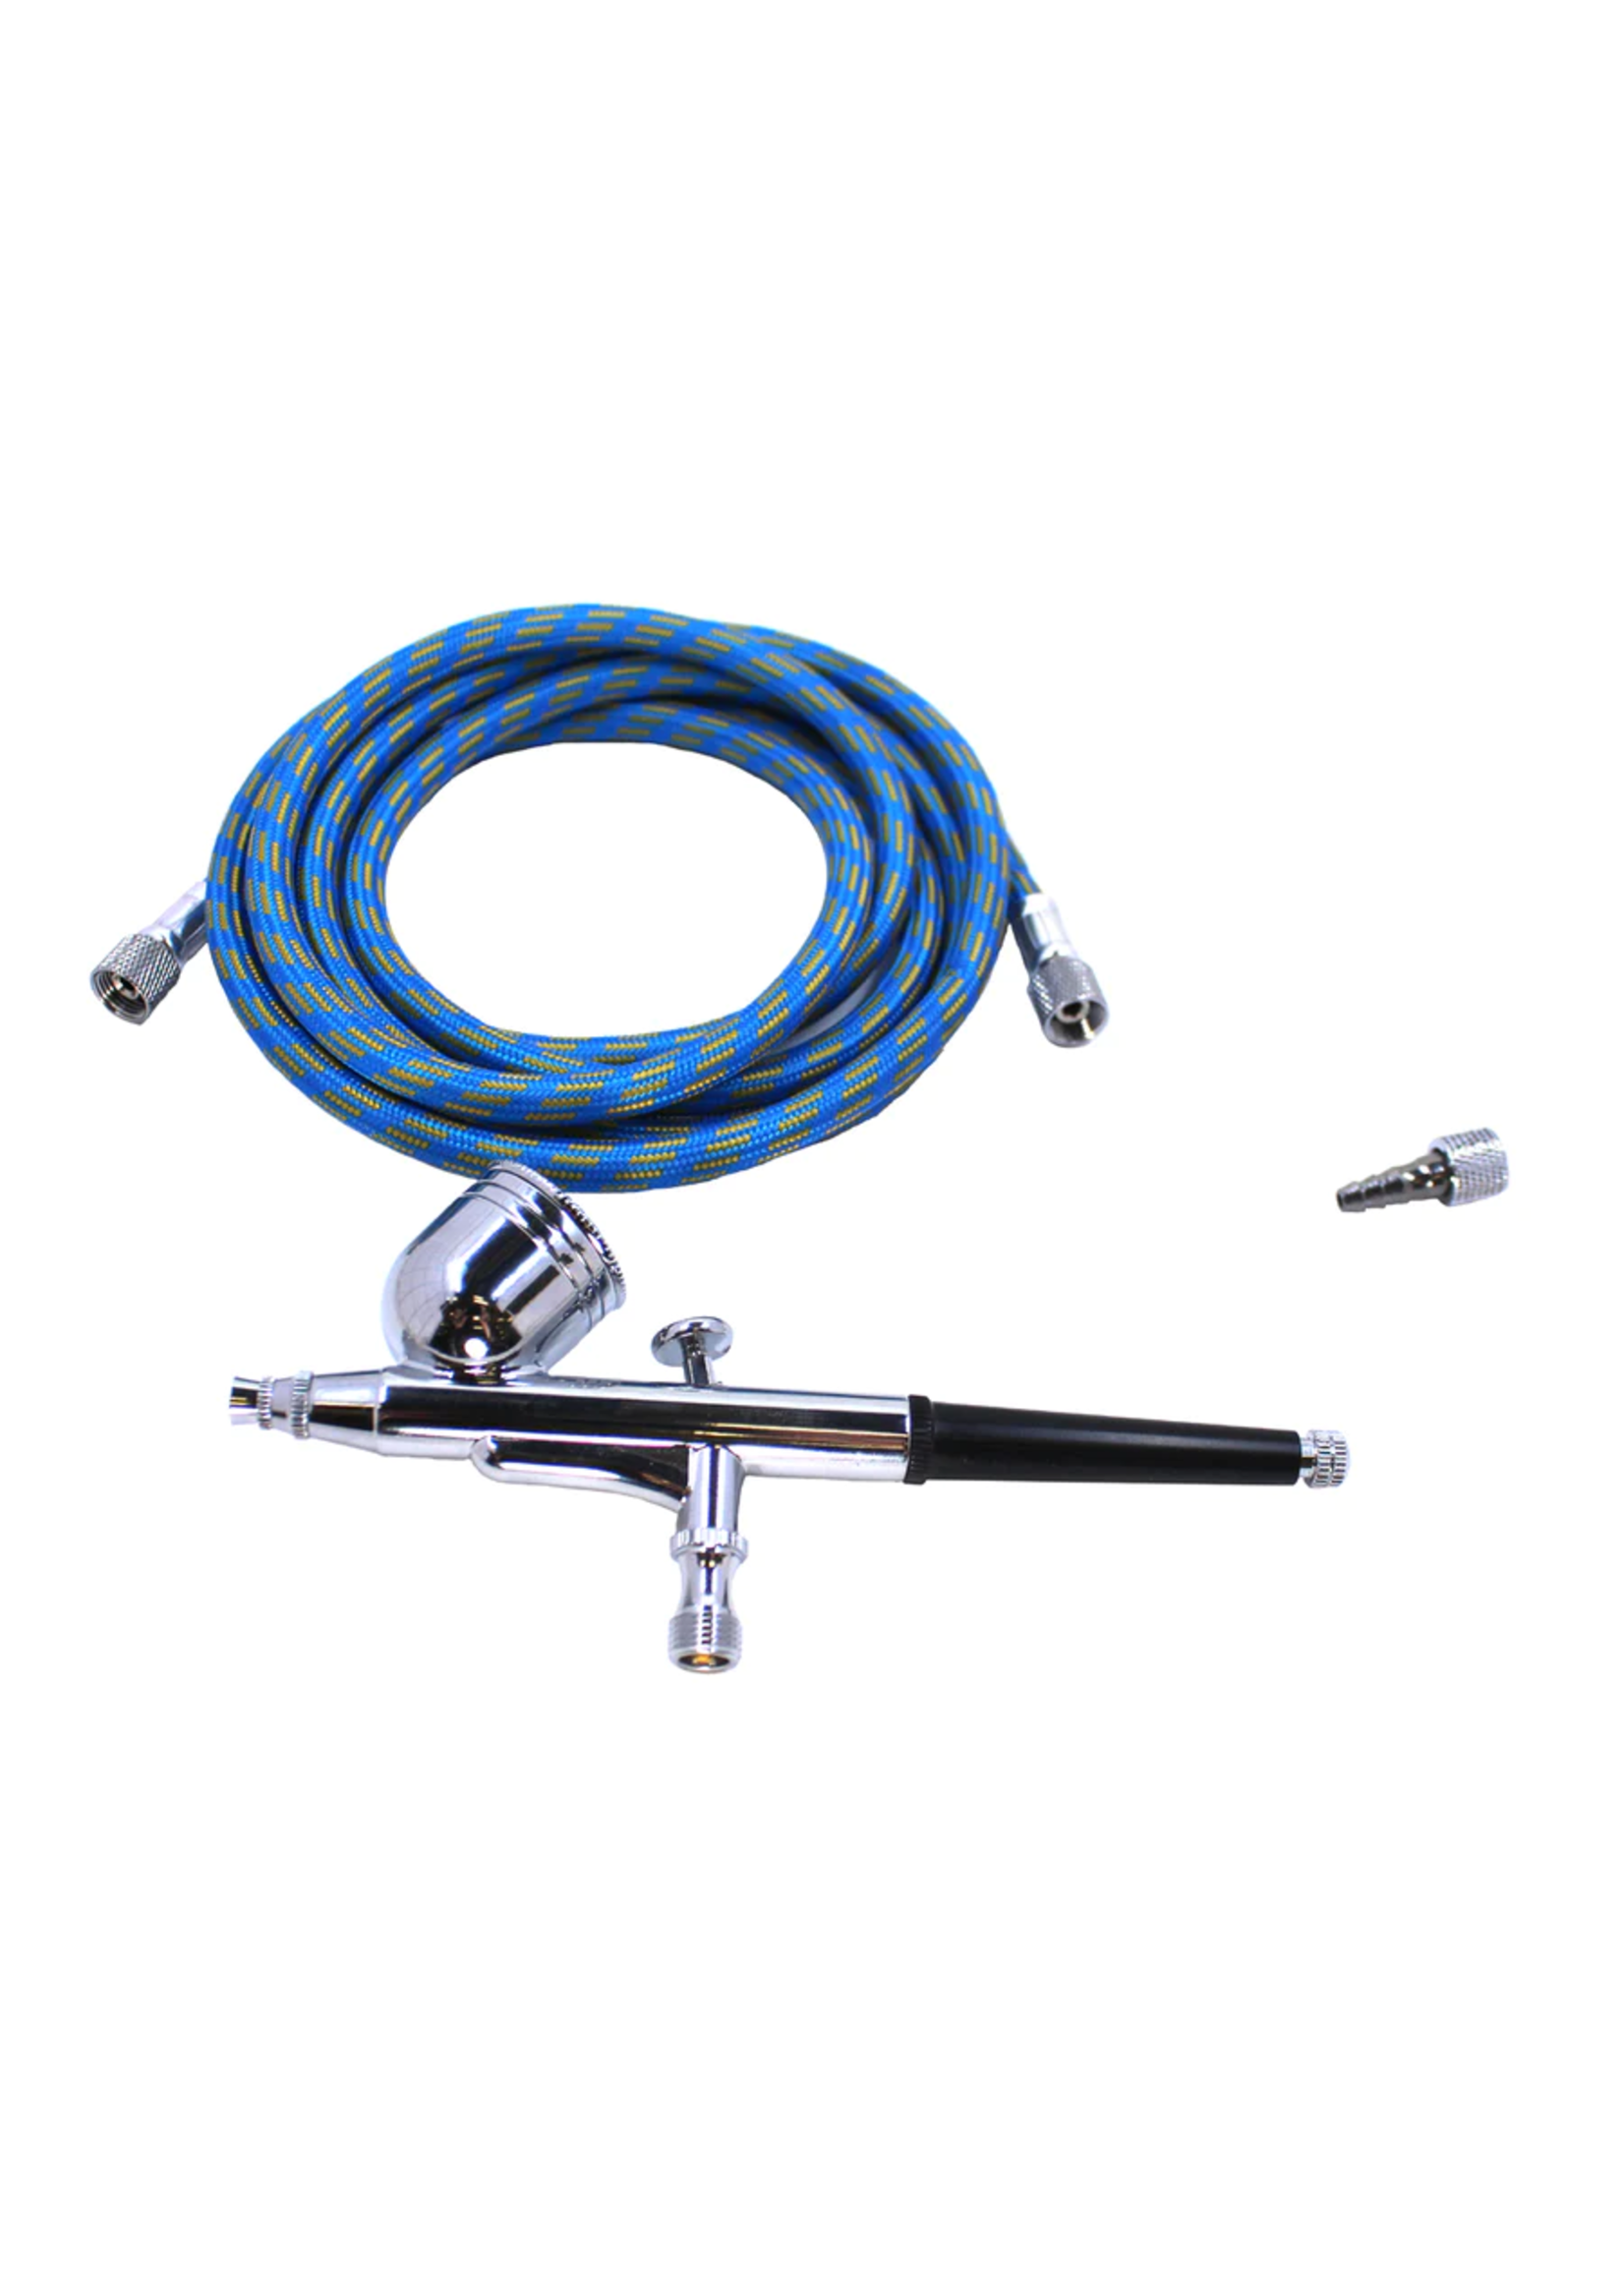 Multi-purpose Airbrush Kit with Mini Compressor, Dual-action Gravity Feed  Airbrush and Air Hose